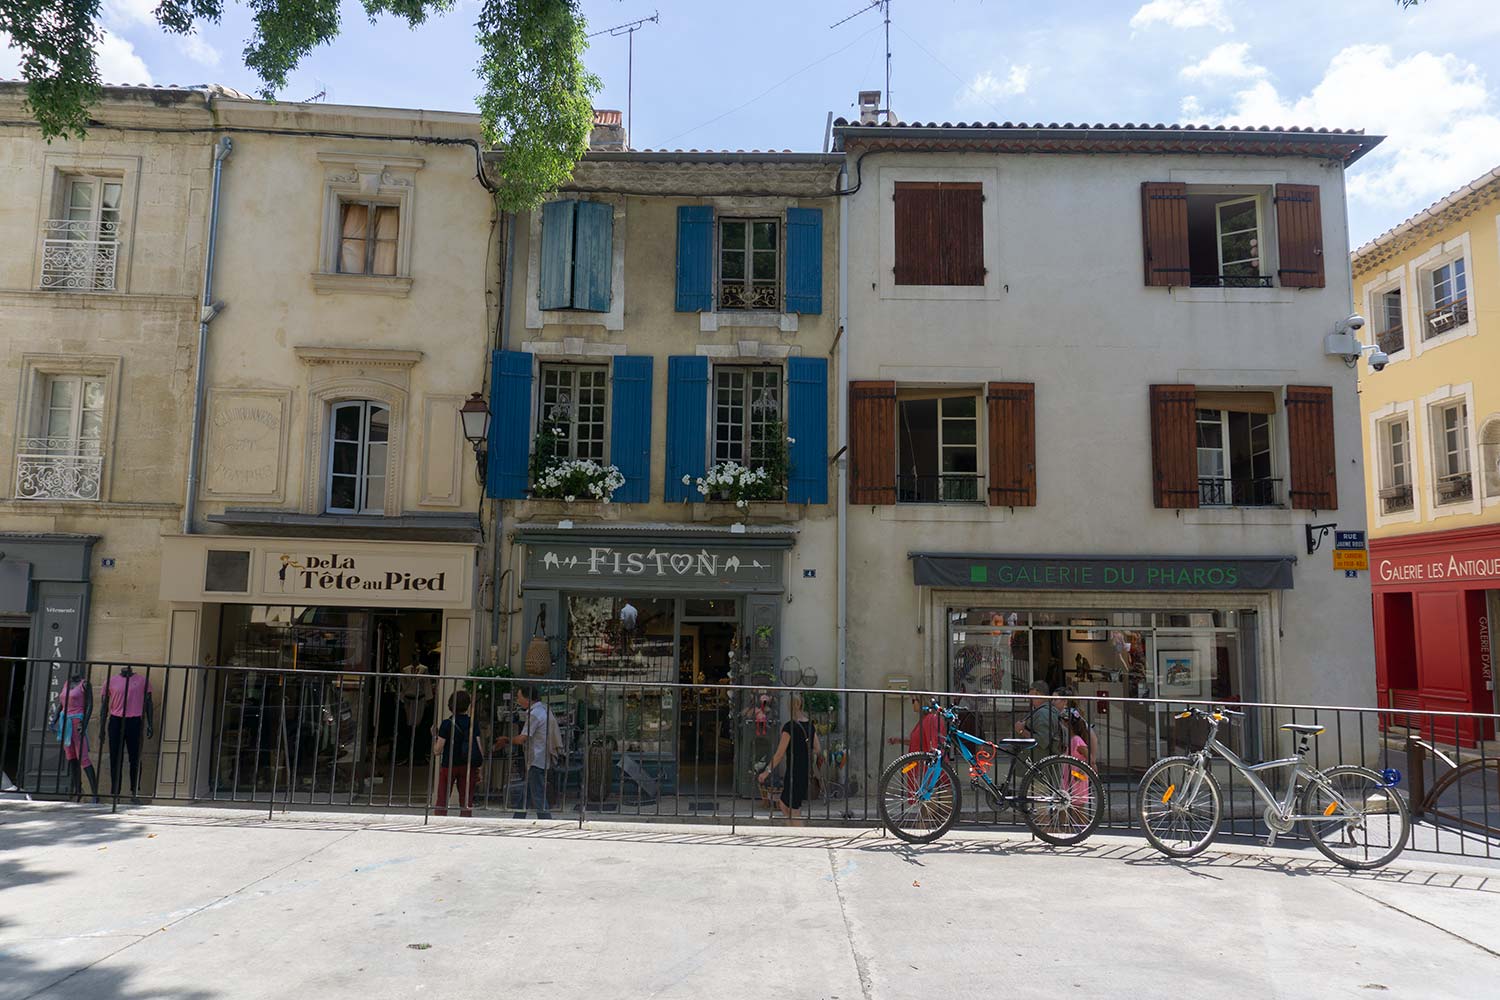 A plaza in Saint-Remy surrounded by buildings with colorful shutters. Two bikes are resting against a railing.